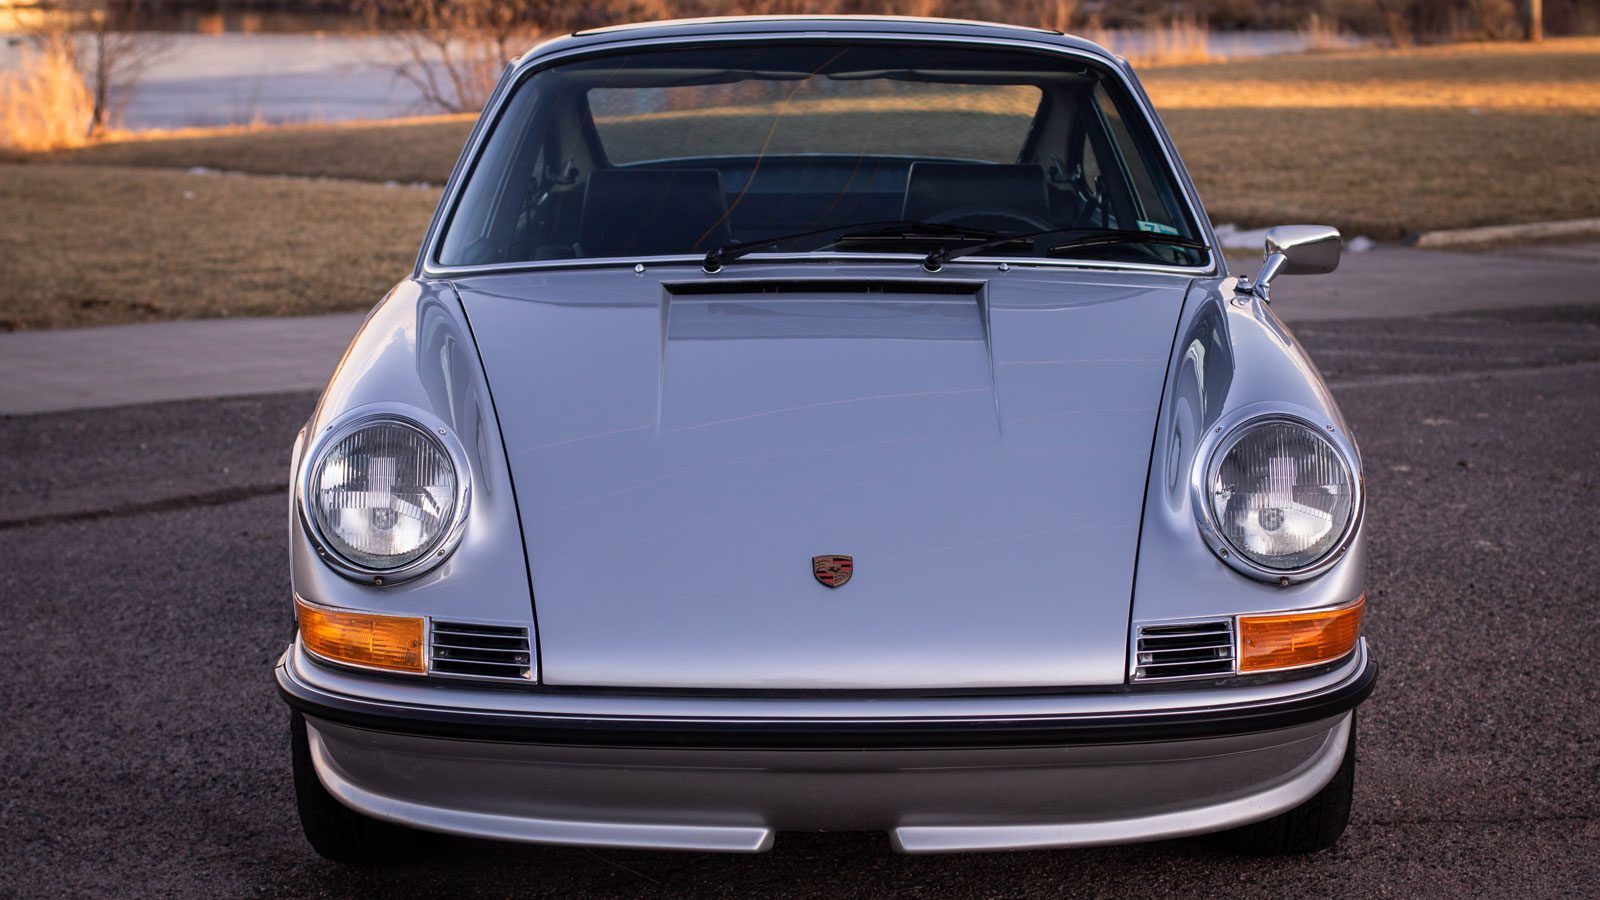 Sell your Porsche 911 regardless of its condition